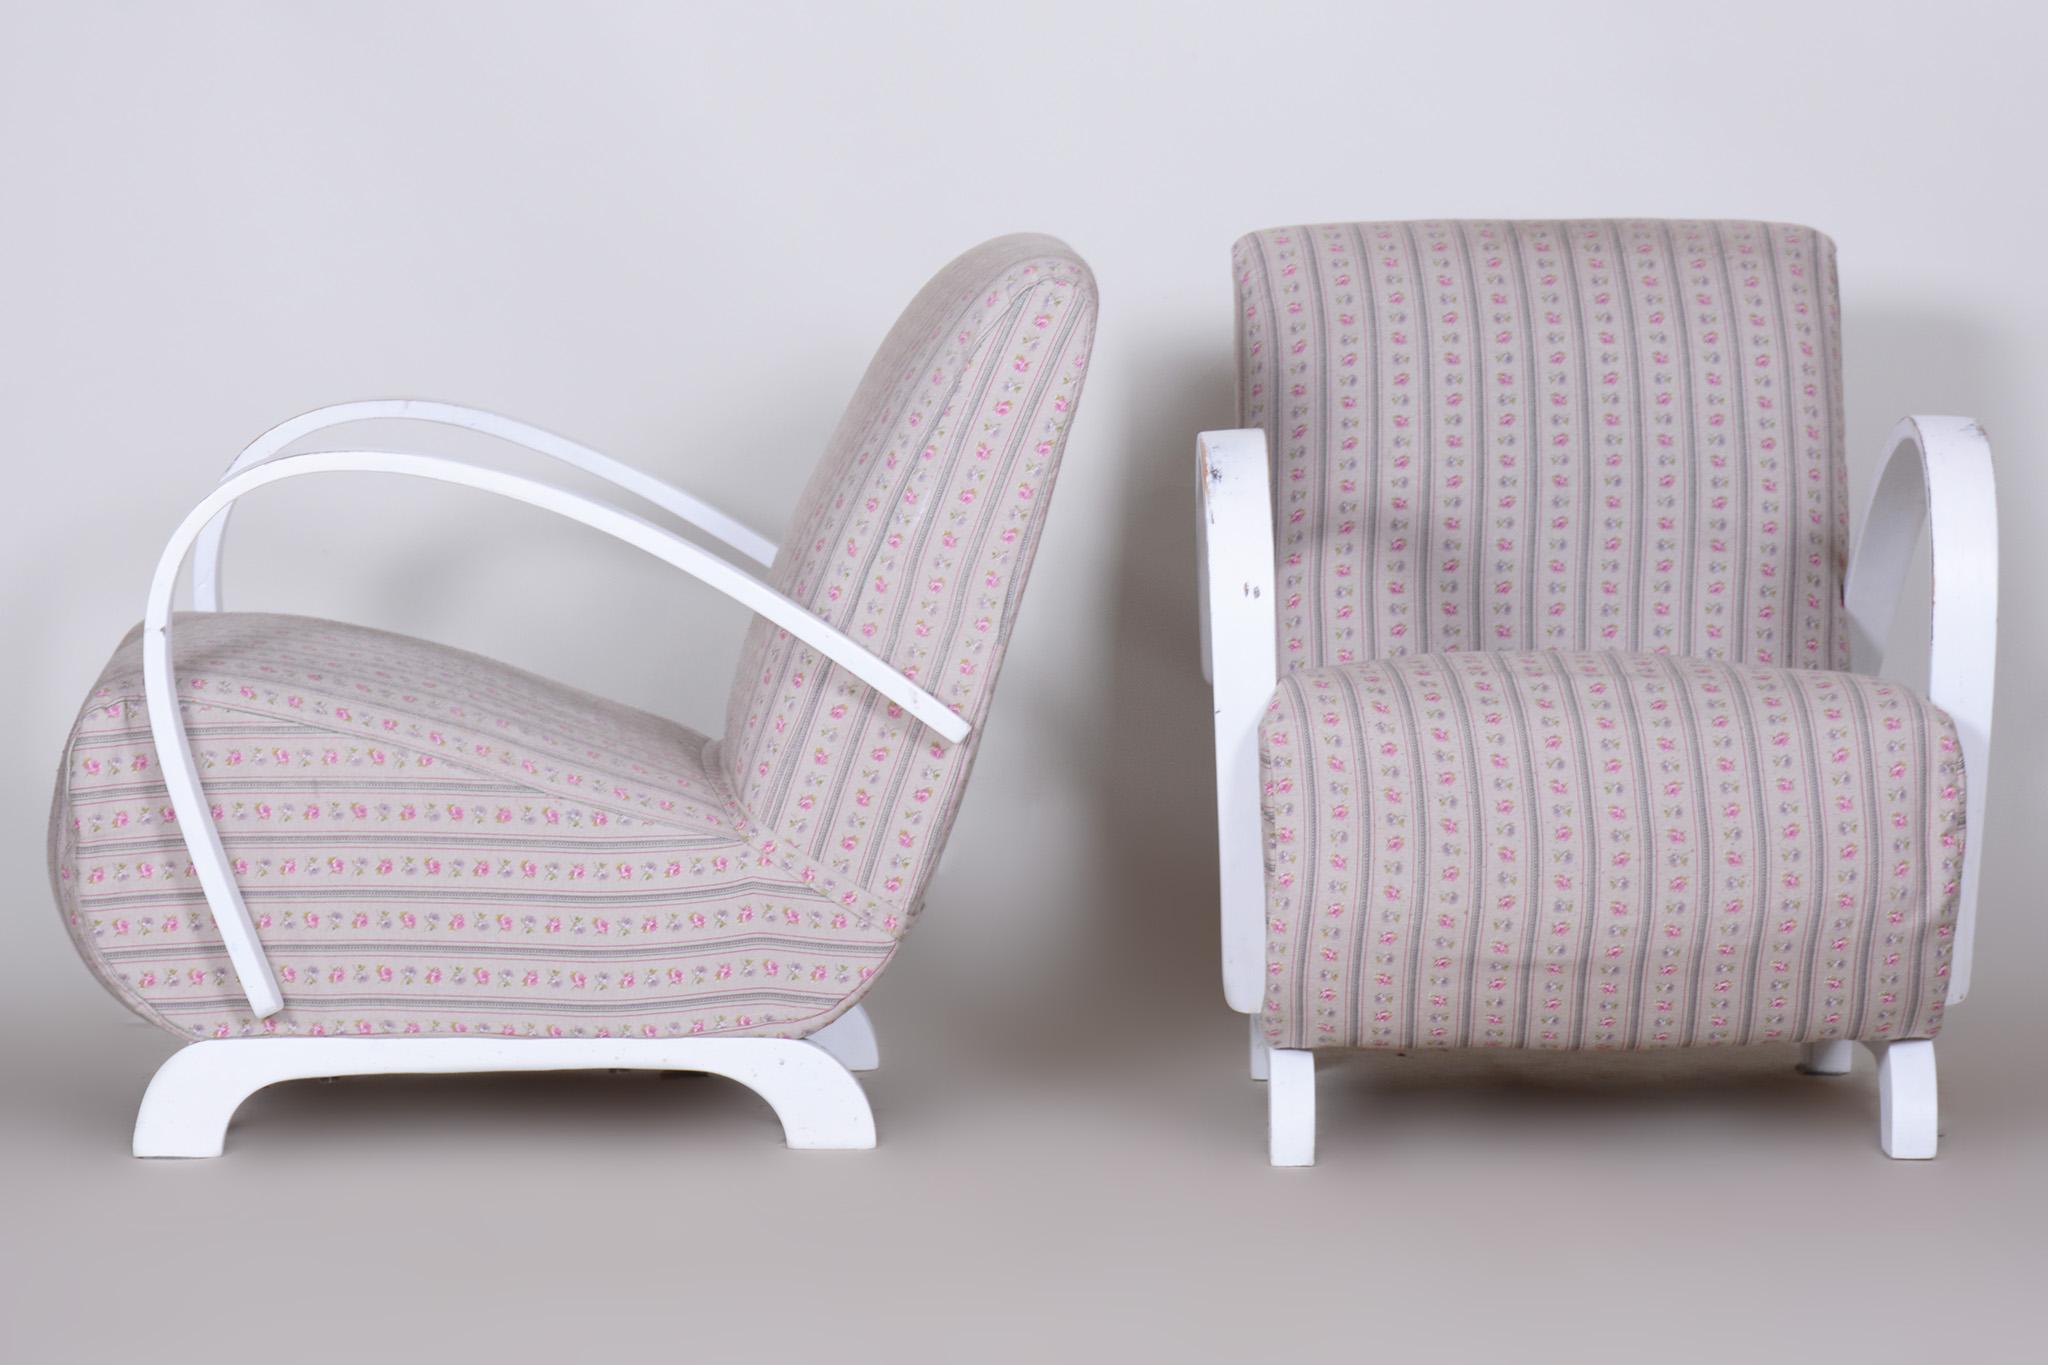 Original Pair of White Art Deco Beech Armchairs, Czechia, 1930s In Good Condition For Sale In Horomerice, CZ